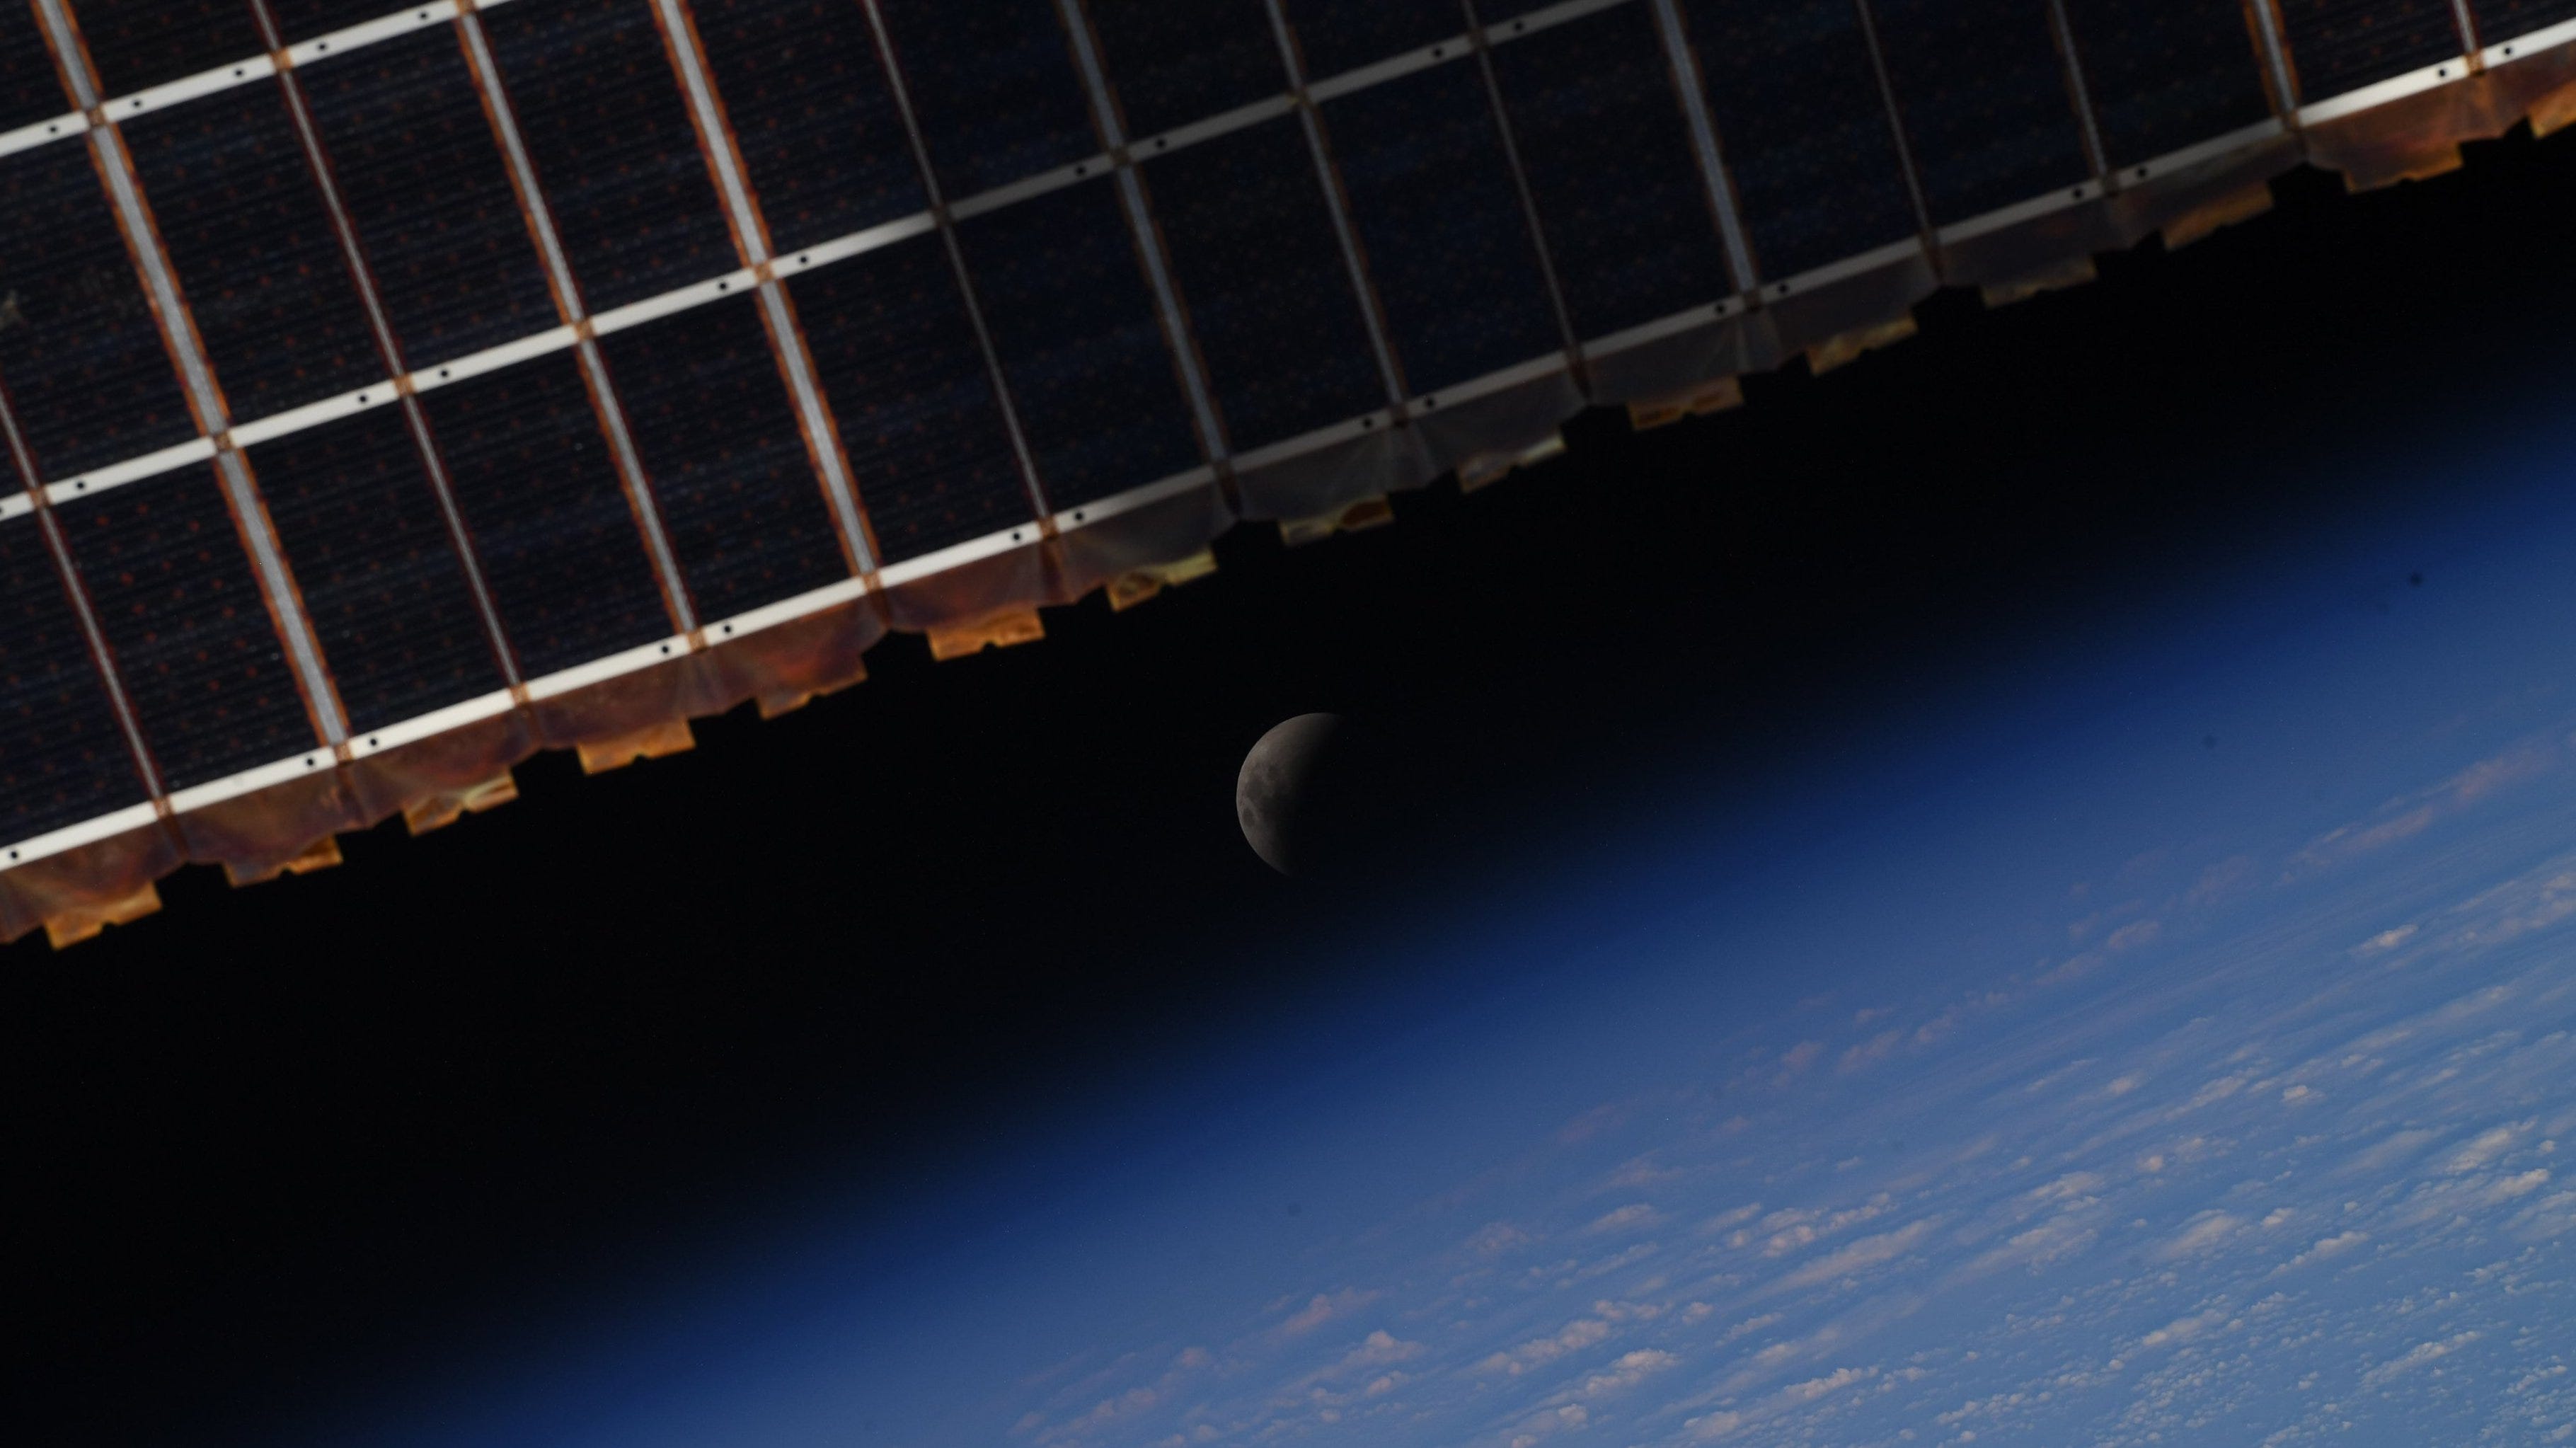 See Astronaut's Sublime Shot of Total Lunar Eclipse Dancing With the ISS